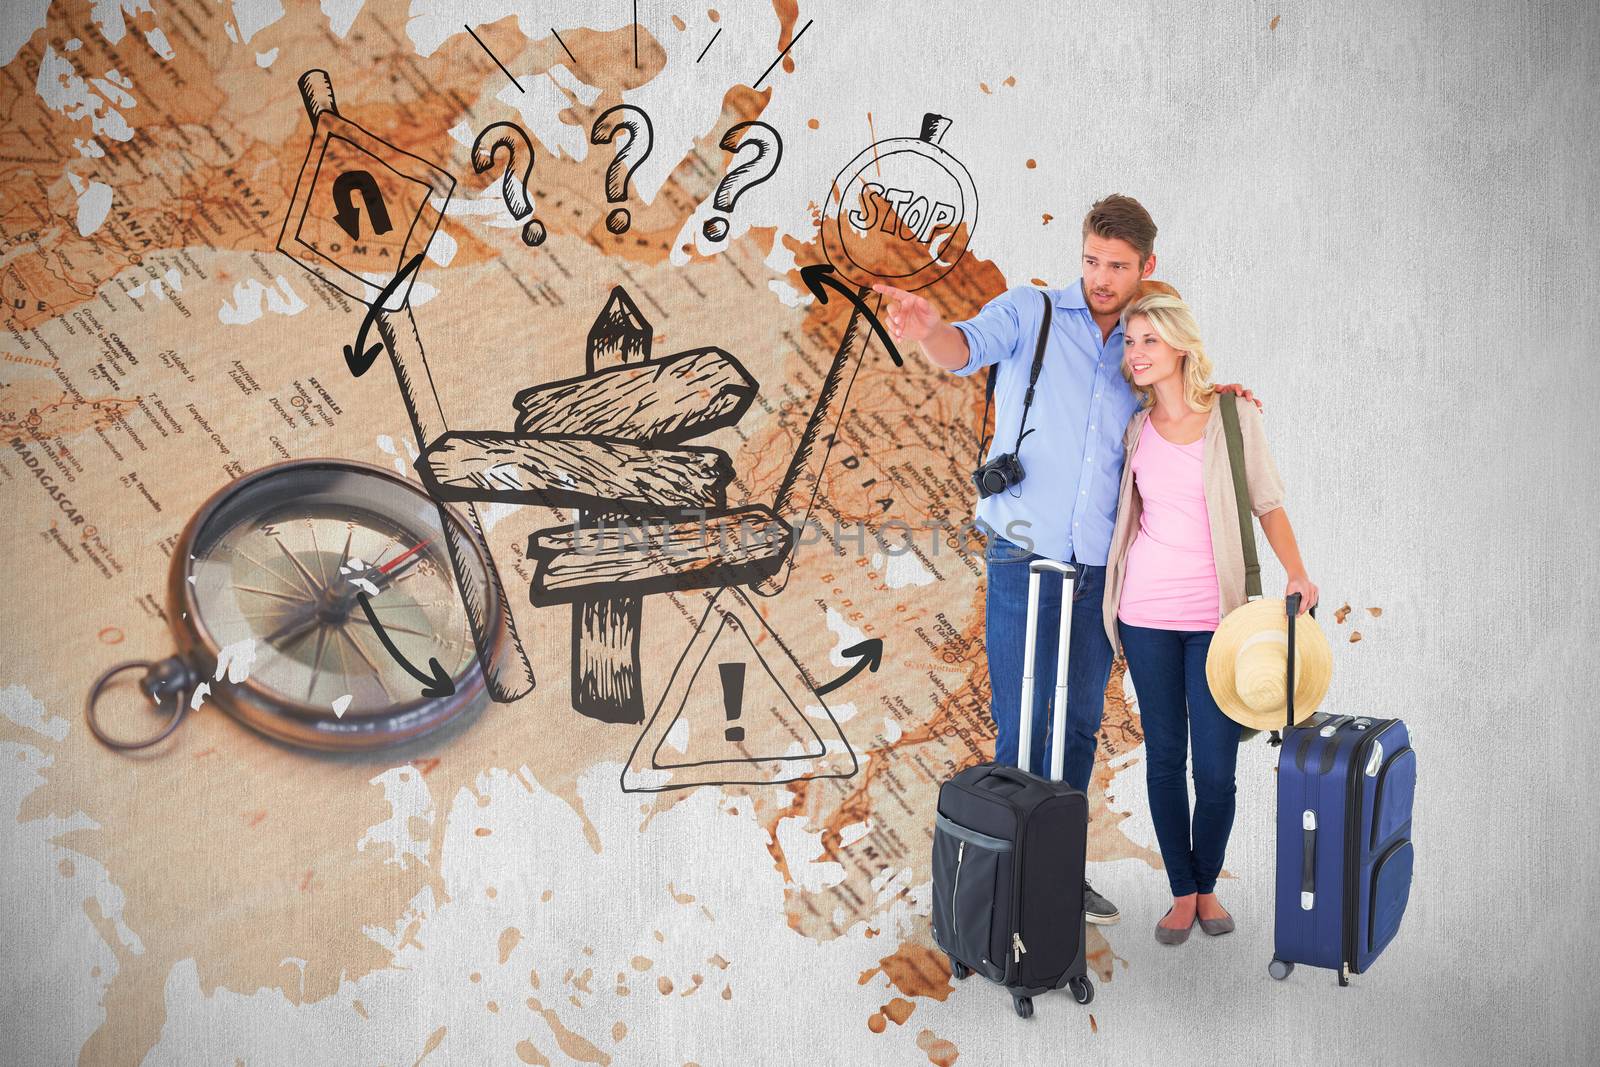 Composite image of attractive young couple ready to go on vacation by Wavebreakmedia